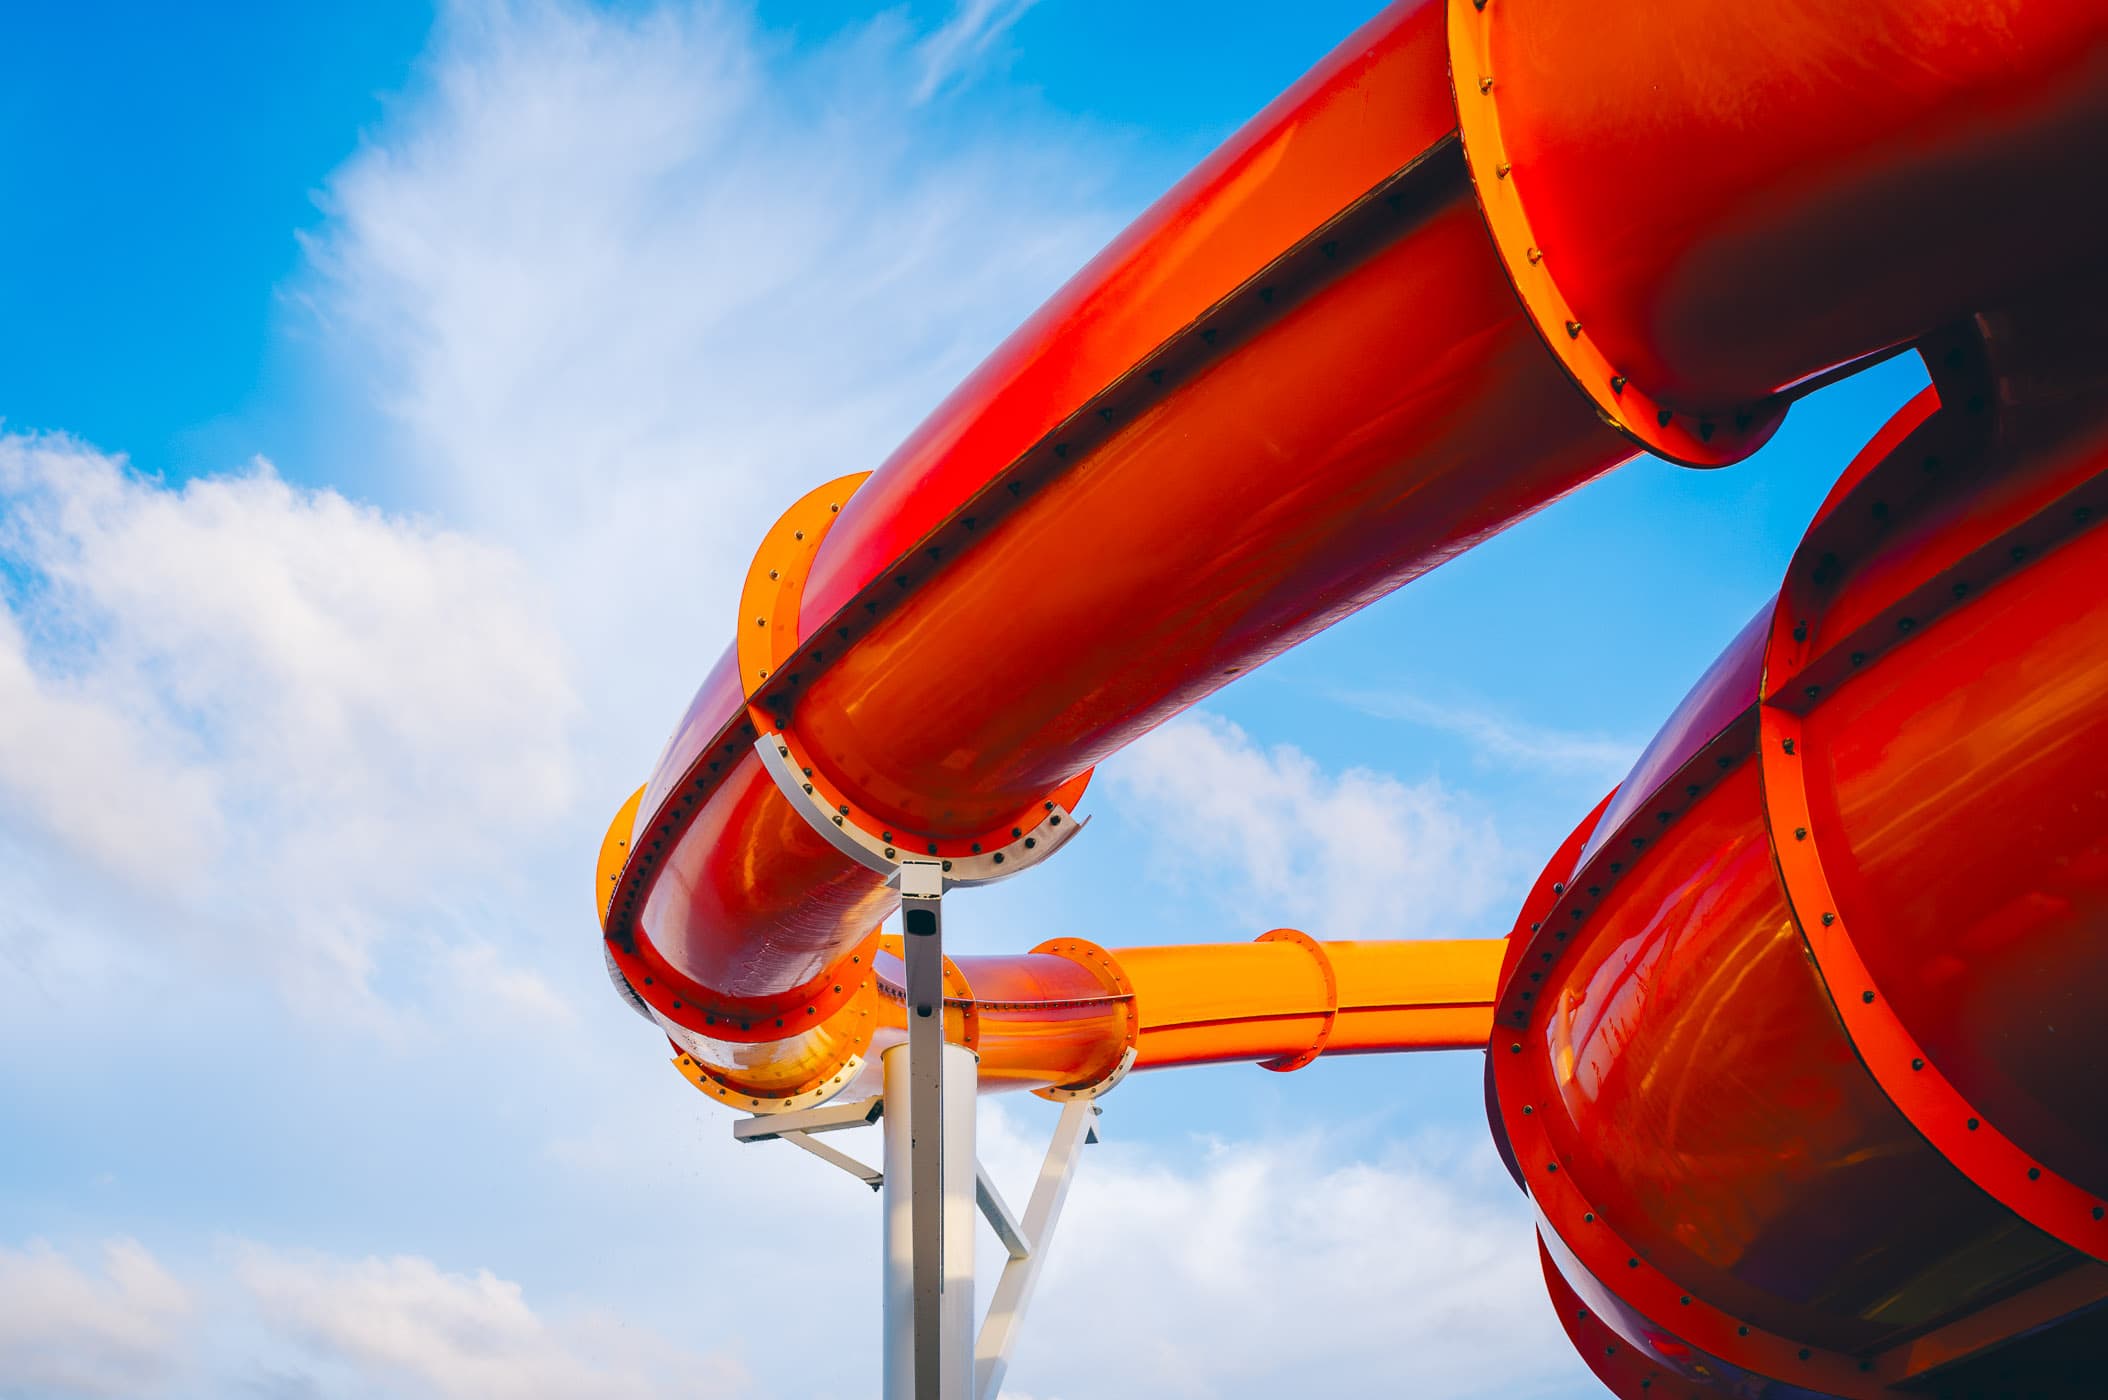 A waterslide on the cruise ship Carnival Magic loops through the sky over the ship somewhere in the Gulf of Mexico.